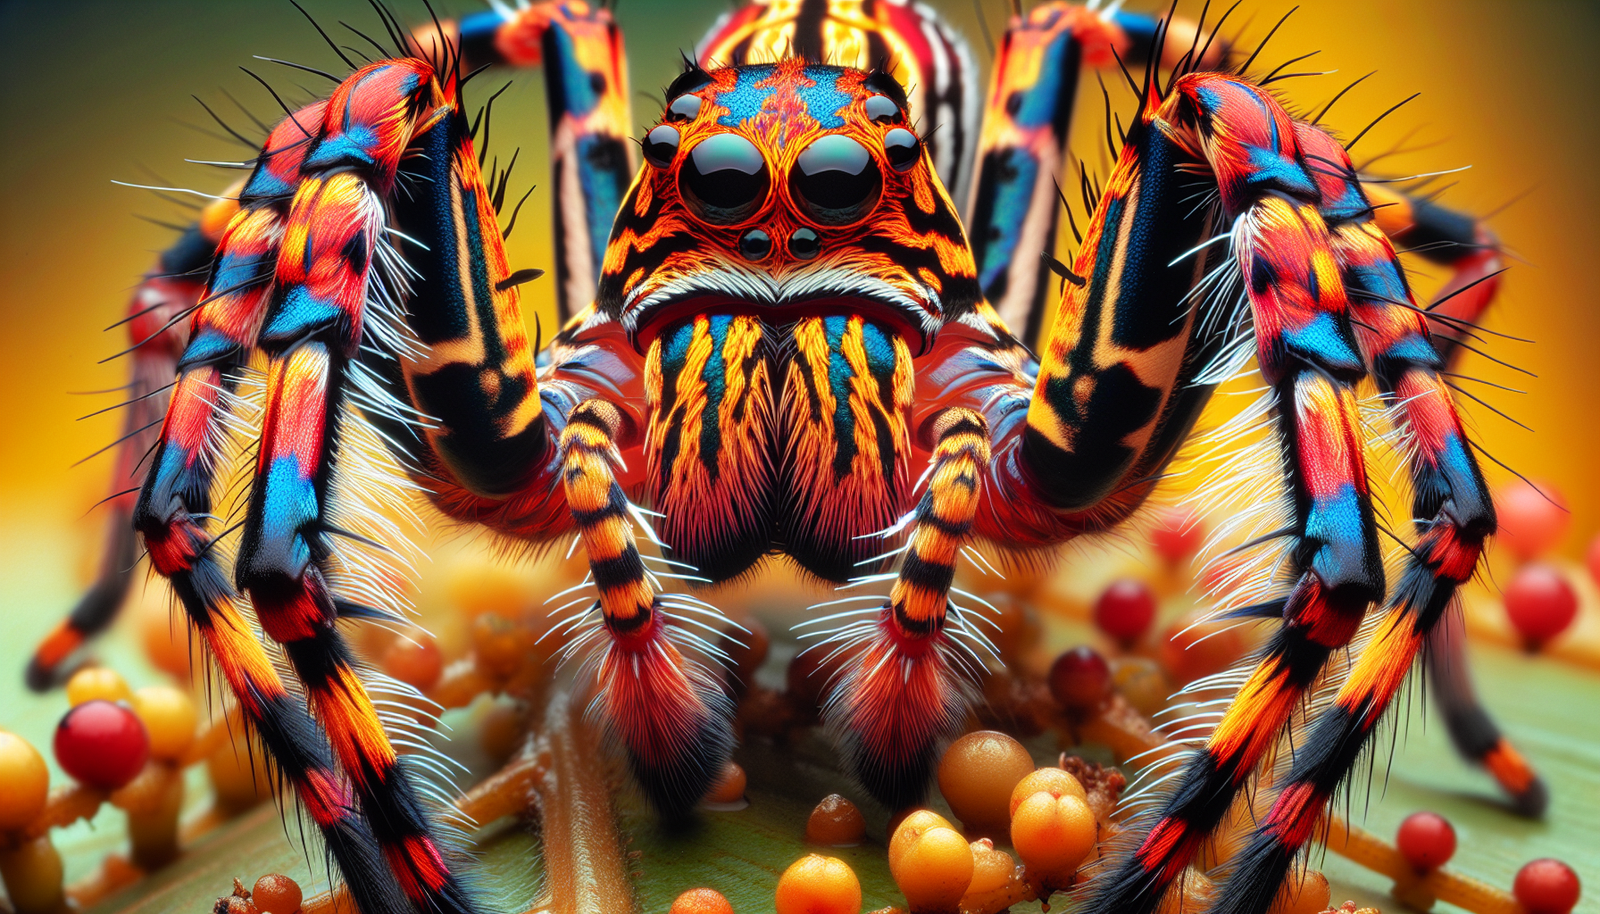 What Are The Characteristics Of The Vibrant And Fast-moving Malaysian Tiger Spider?